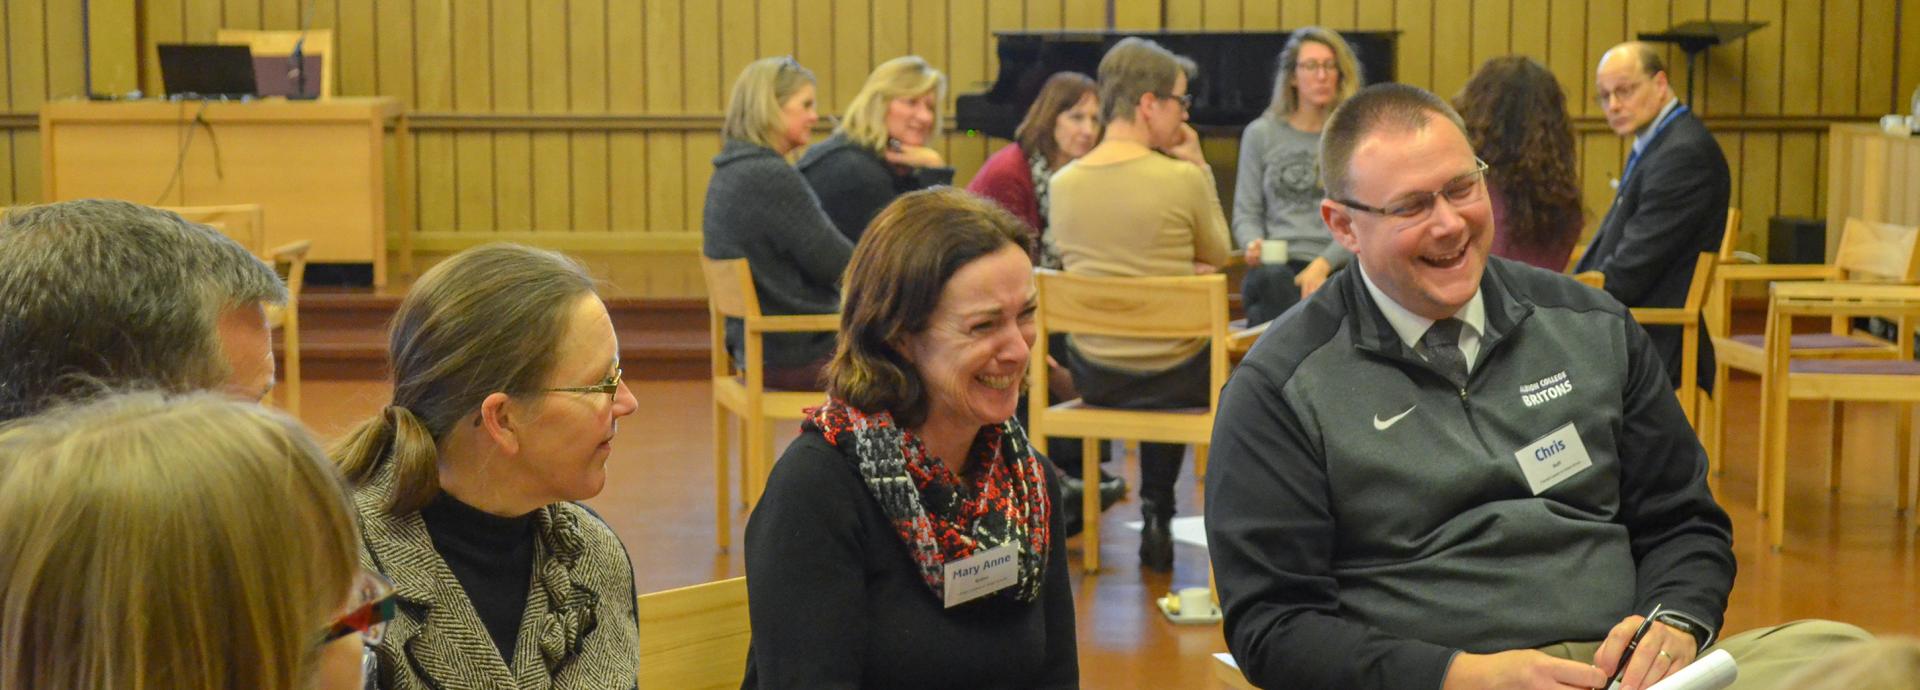 Two Fulbright Leaders for Global Schools participants laughing during a small group discussion in the Seminarium Festival hall at the University of Jyväskylä